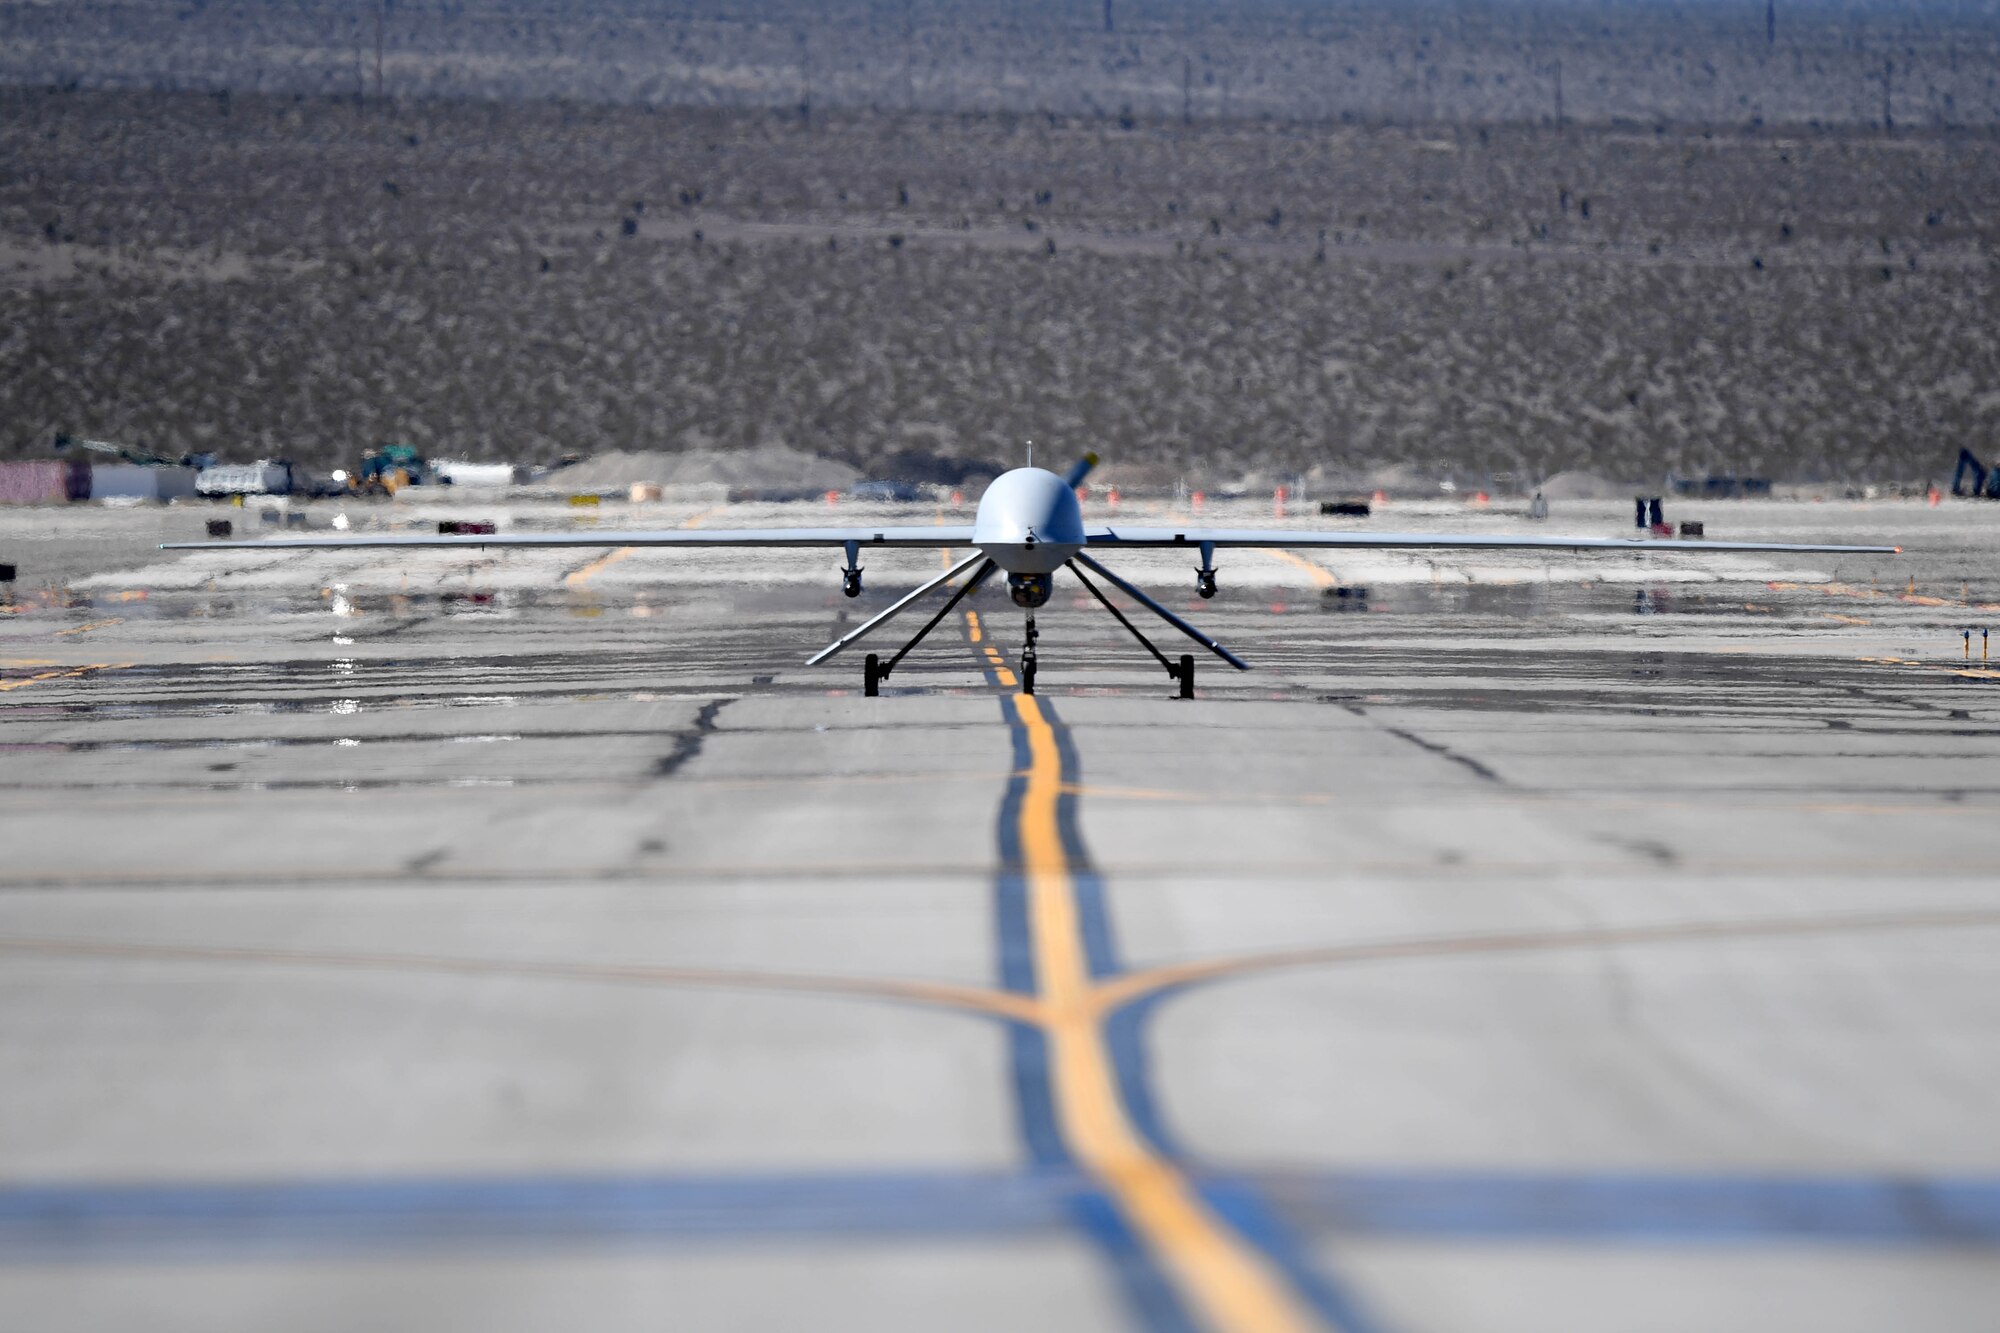 An MQ-1 Predator taxis on the runway March 9, 2018, at Creech Air Force Base, Nev. Today, the MQ-1 took flight for the last time at Creech, marking its retirement and the transition to an all MQ-9 Reaper force. (U.S. Air Force photo by Senior Airman James Thompson)